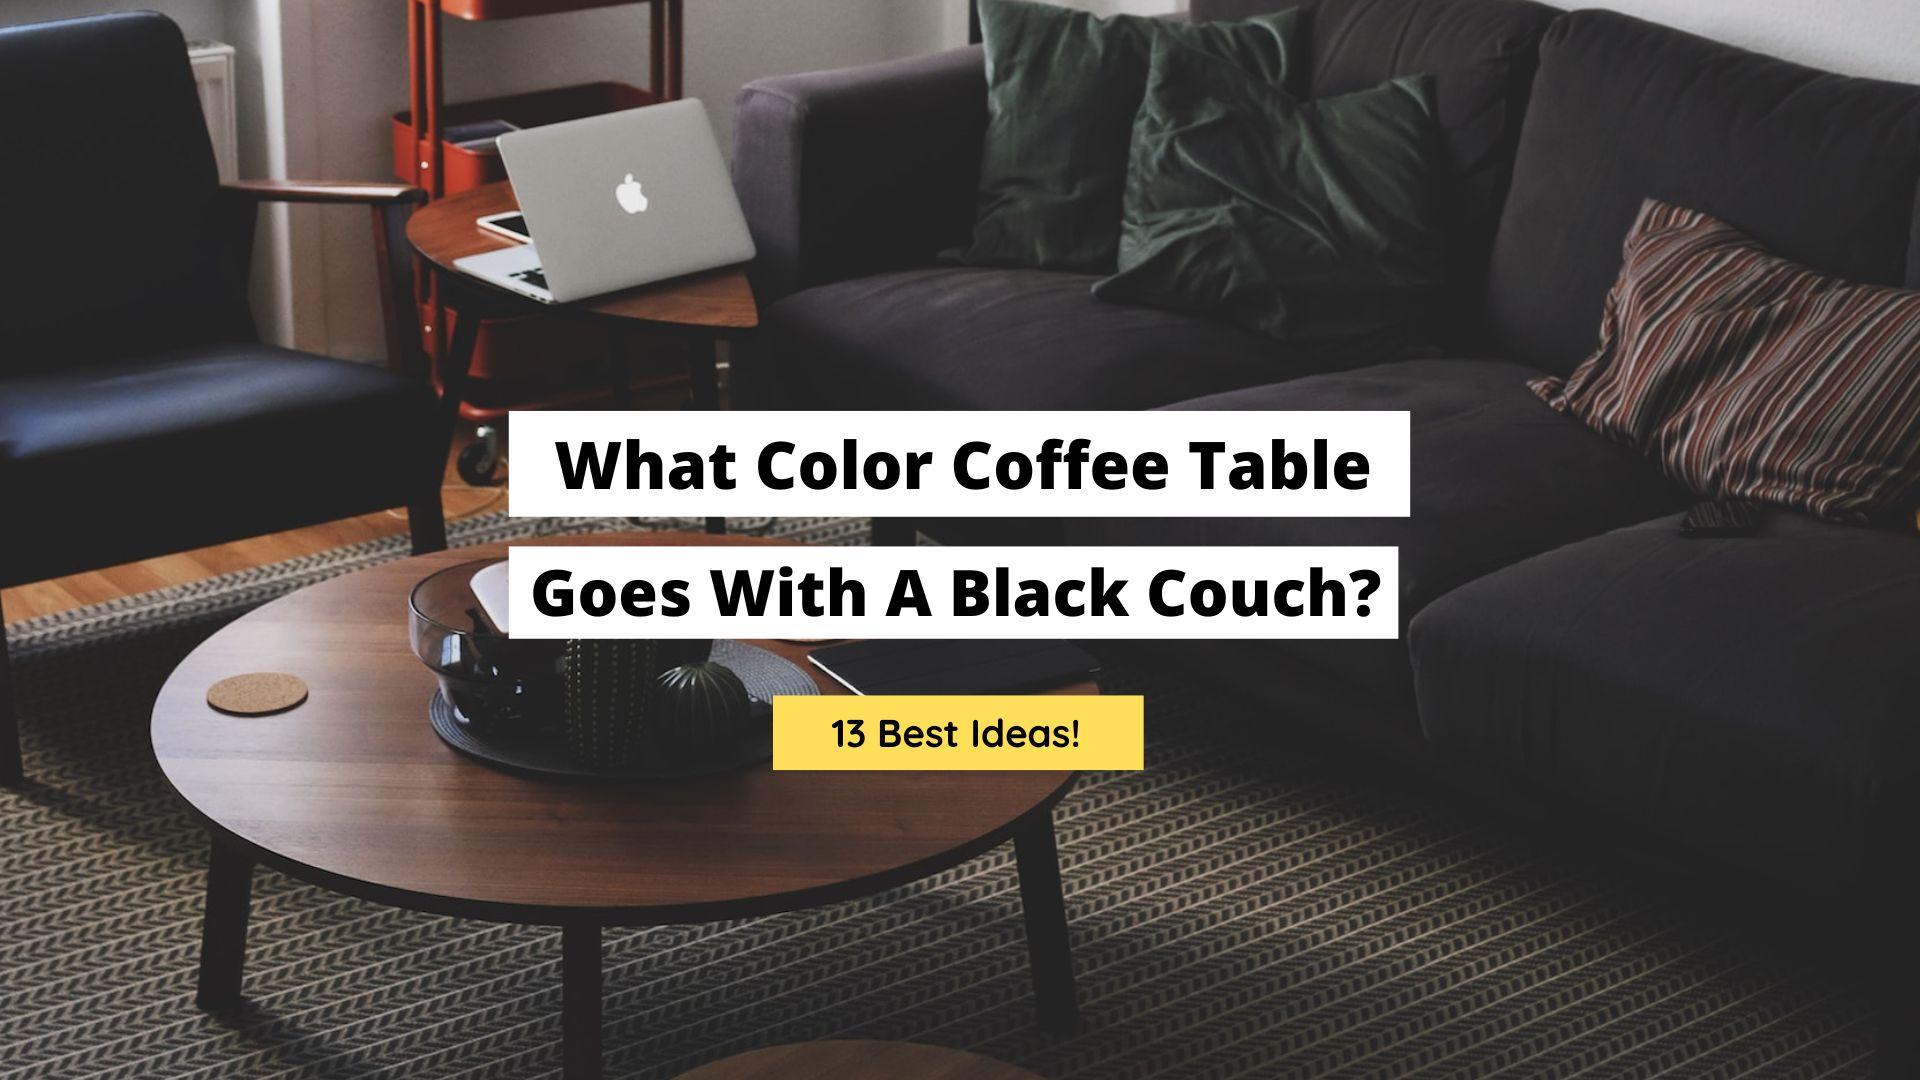 What Color Coffee Table Goes With A Black Couch